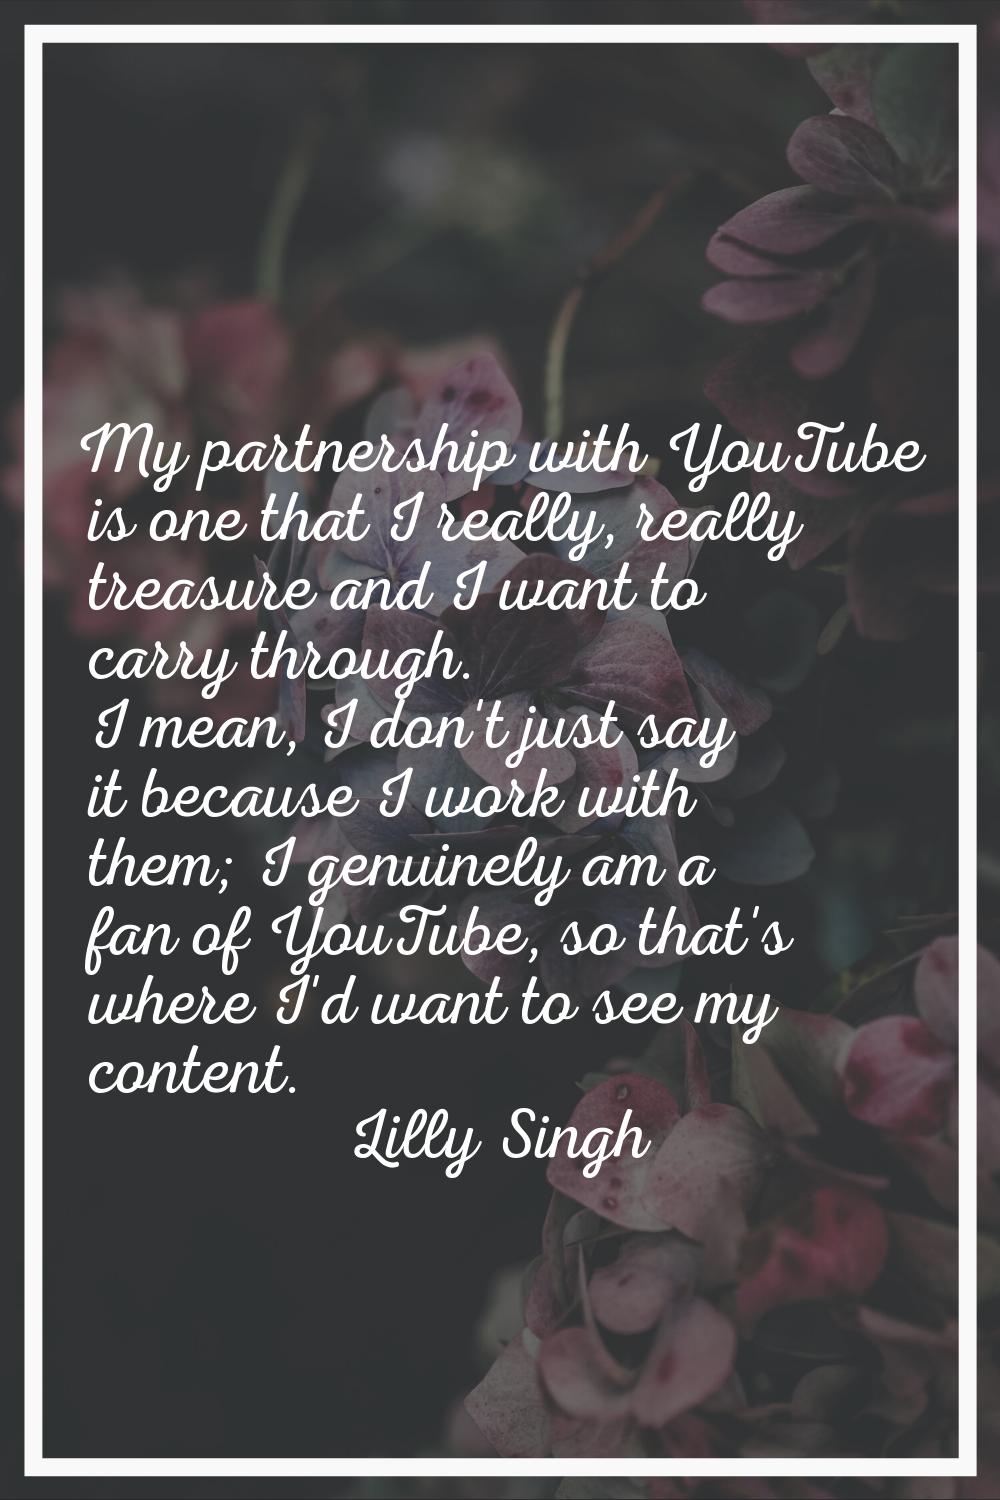 My partnership with YouTube is one that I really, really treasure and I want to carry through. I me